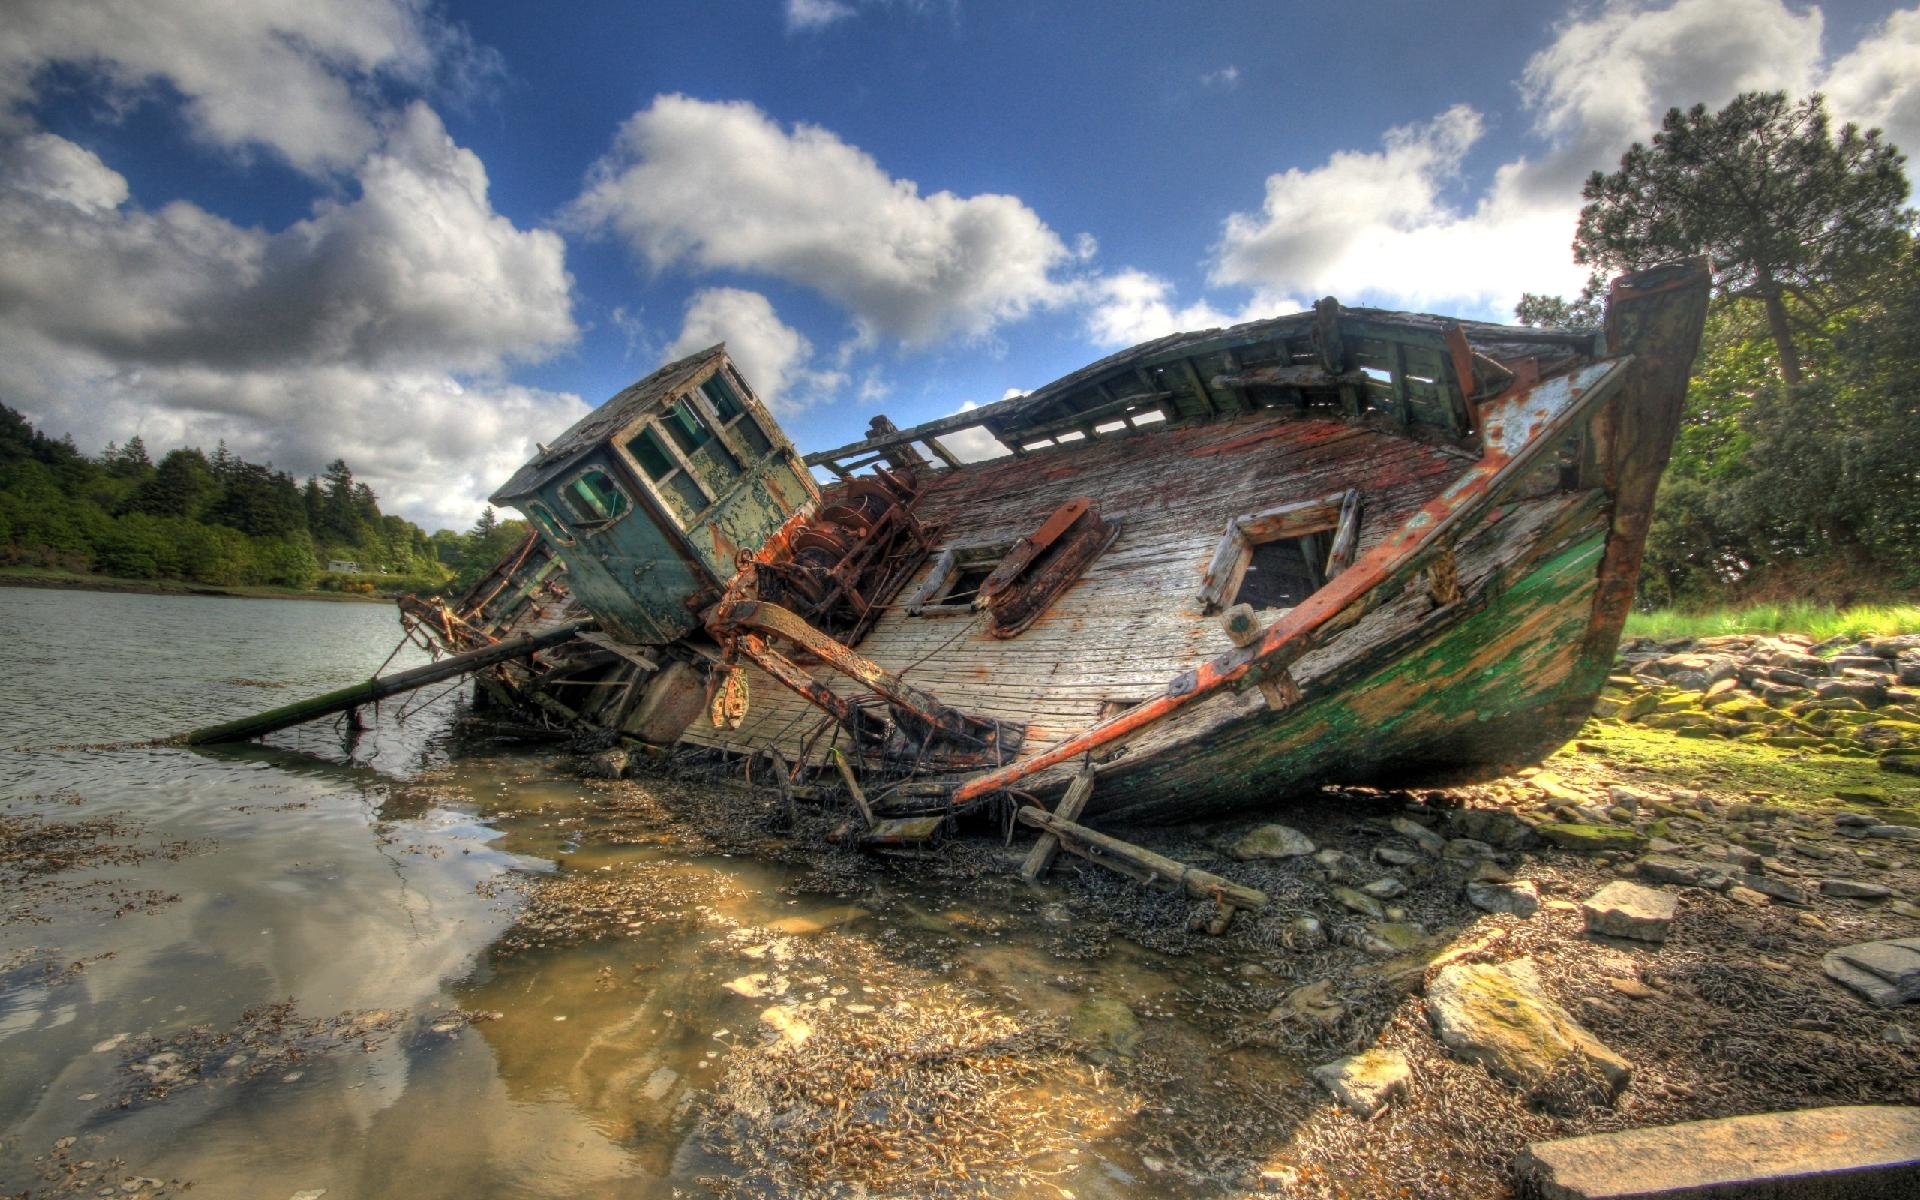 164 Wreck HD Wallpapers | Background Images - Wallpaper Abyss